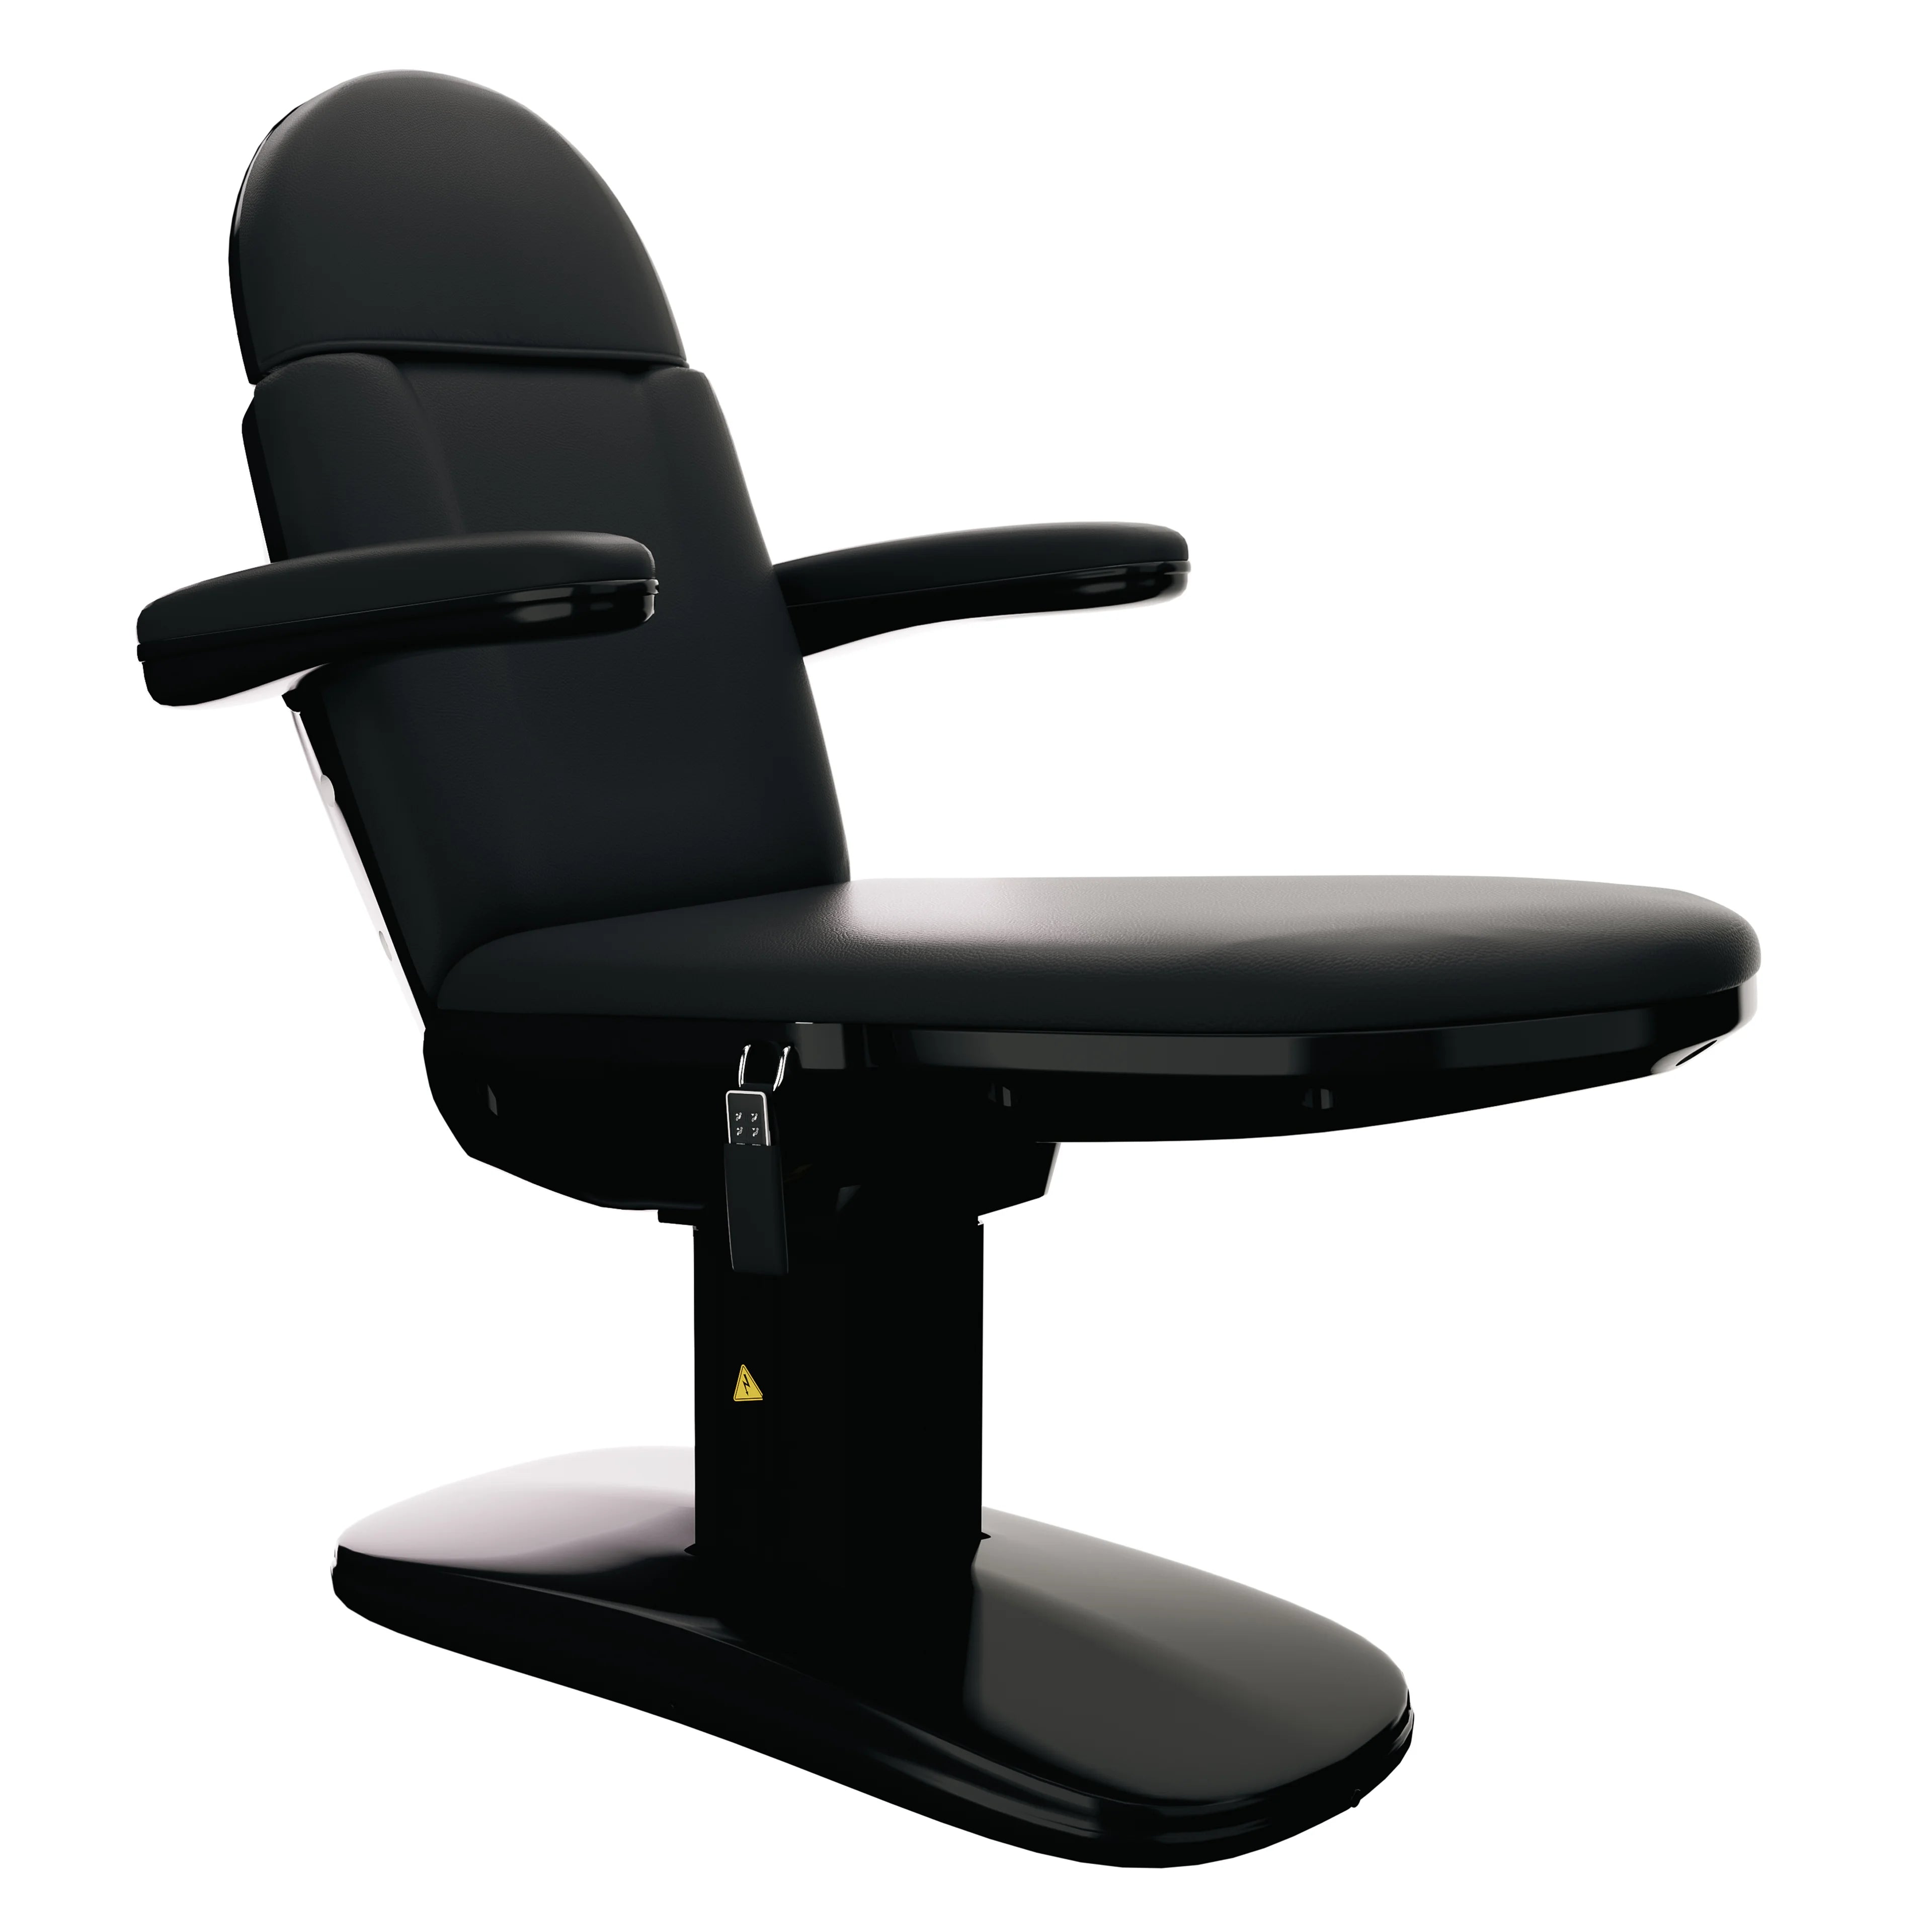 SpaMarc . Benefic (ALL Black) . 4 Motor Spa Treatment Chair/Bed . (Wireless Remote)